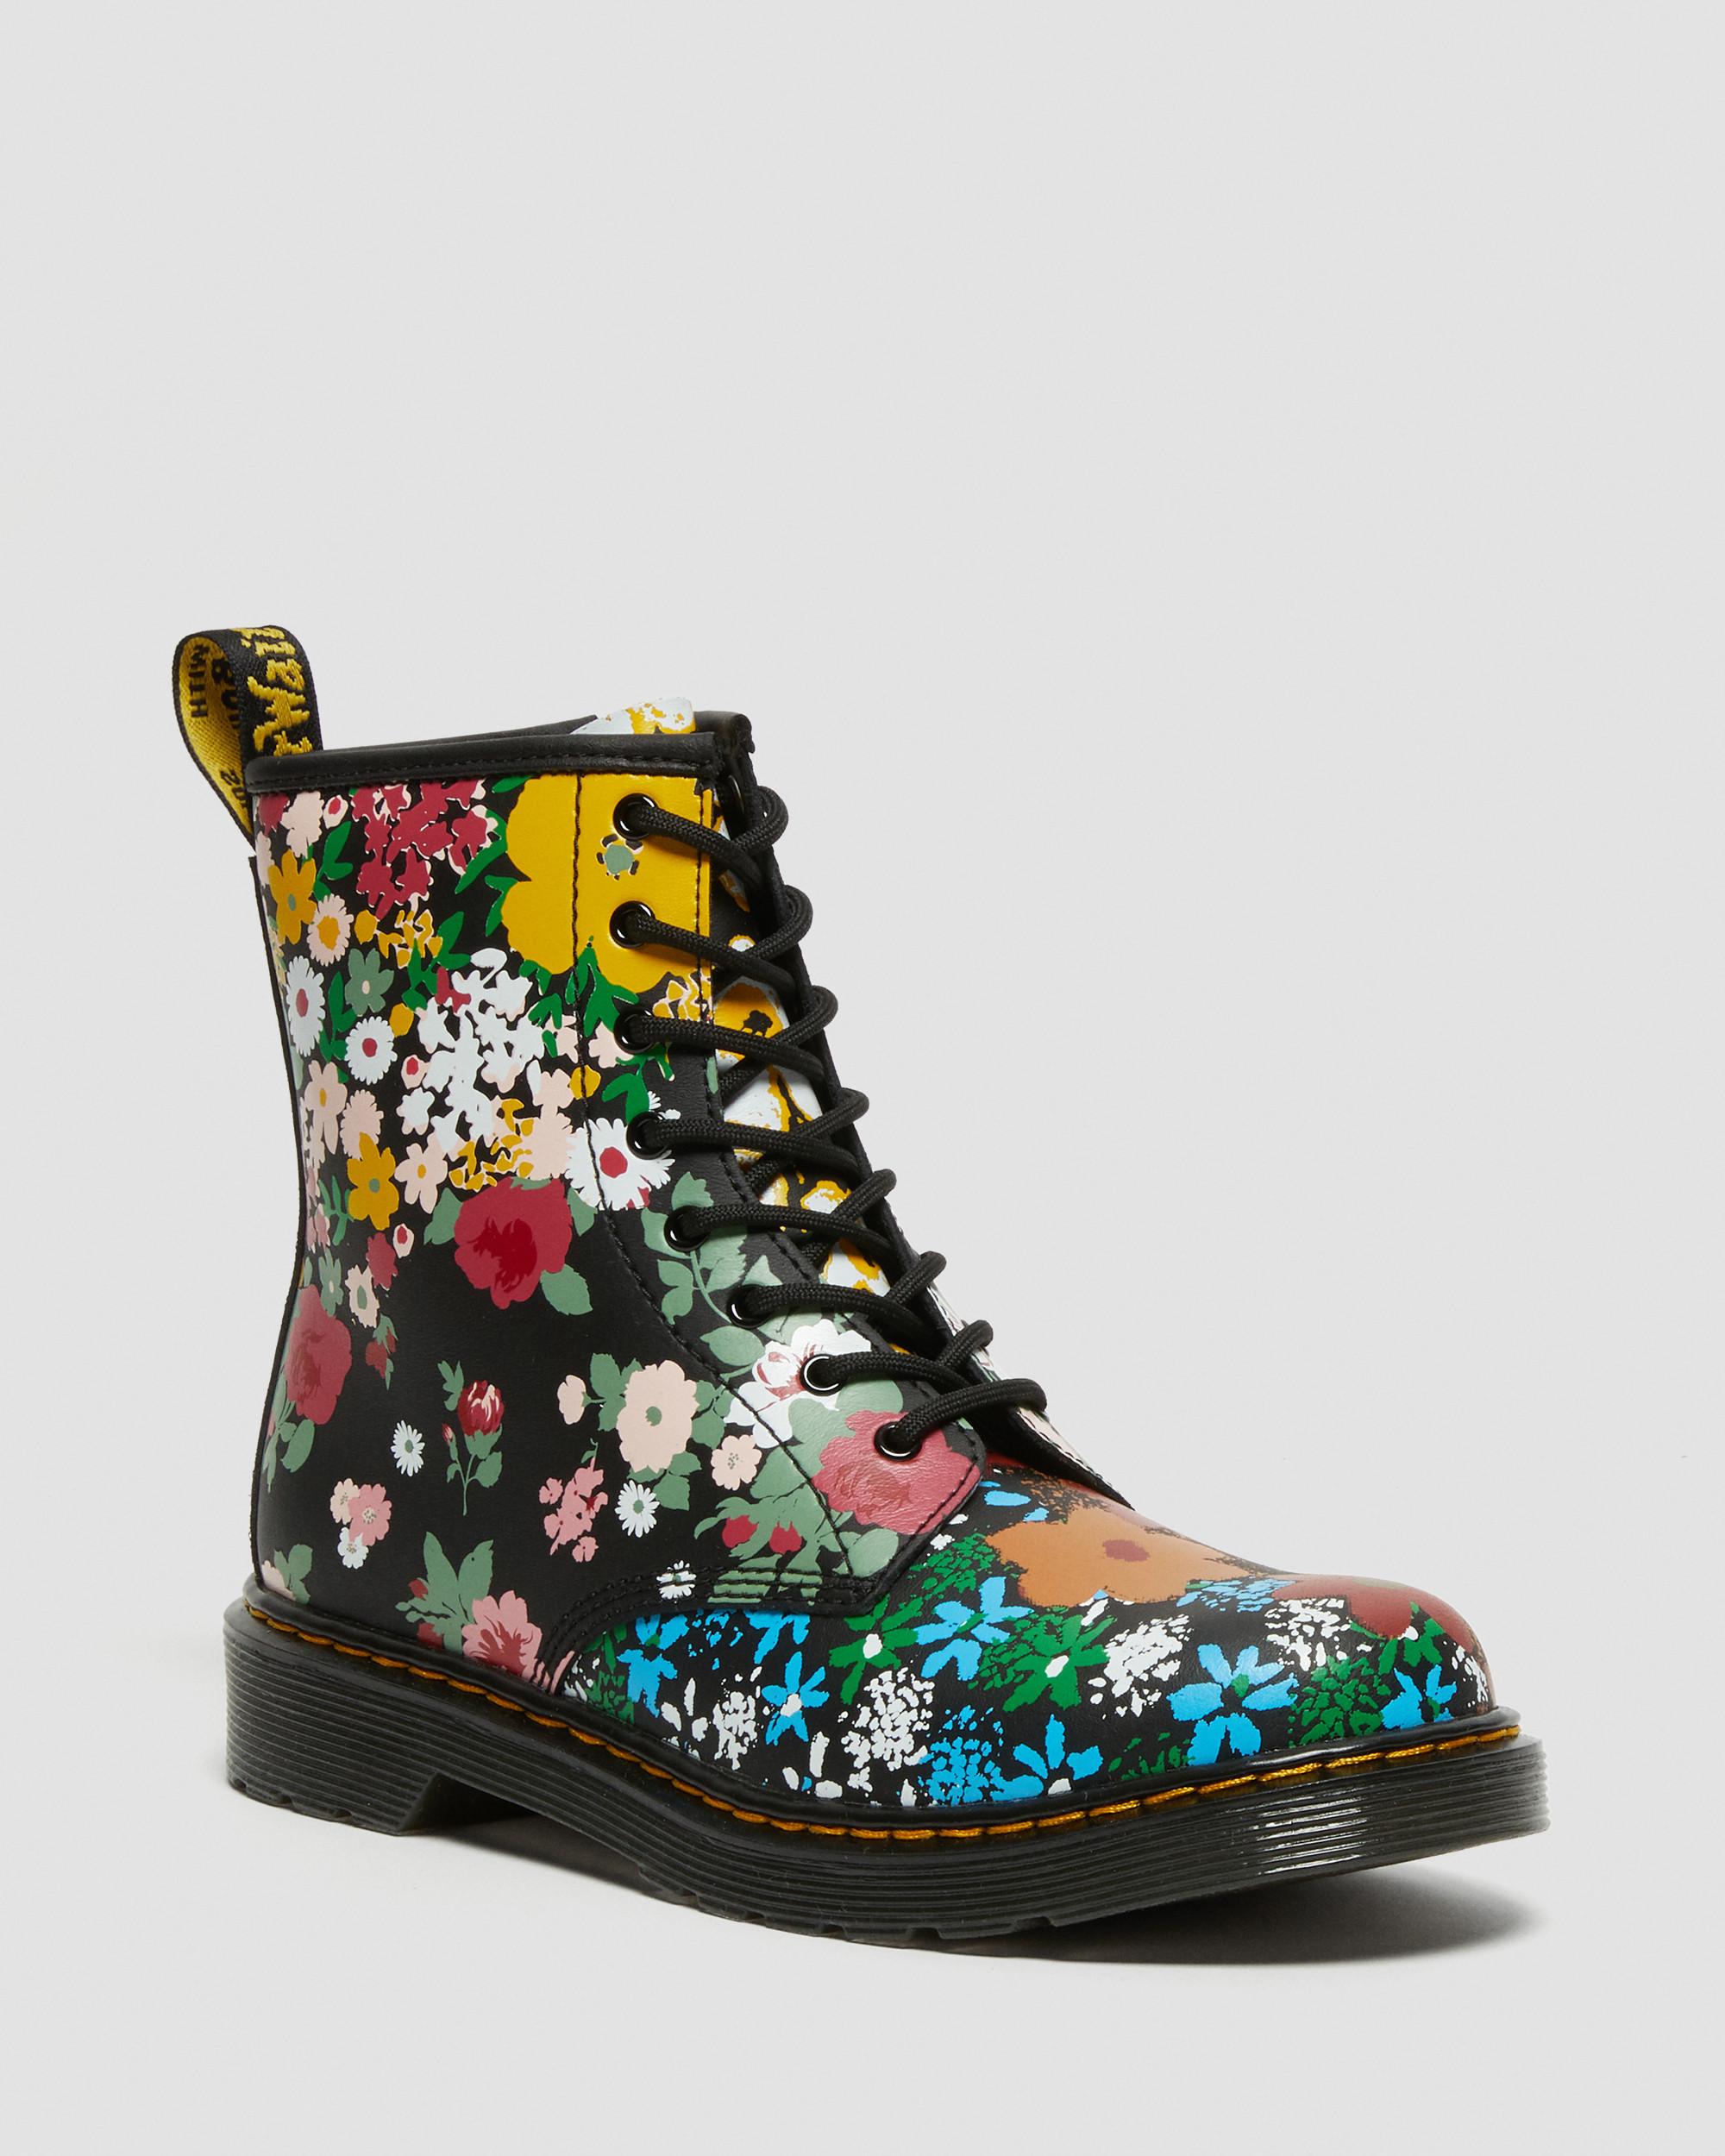 Up Black Martens | Leather Dr. Up Mash Lace Boots Floral 1460 in Youth